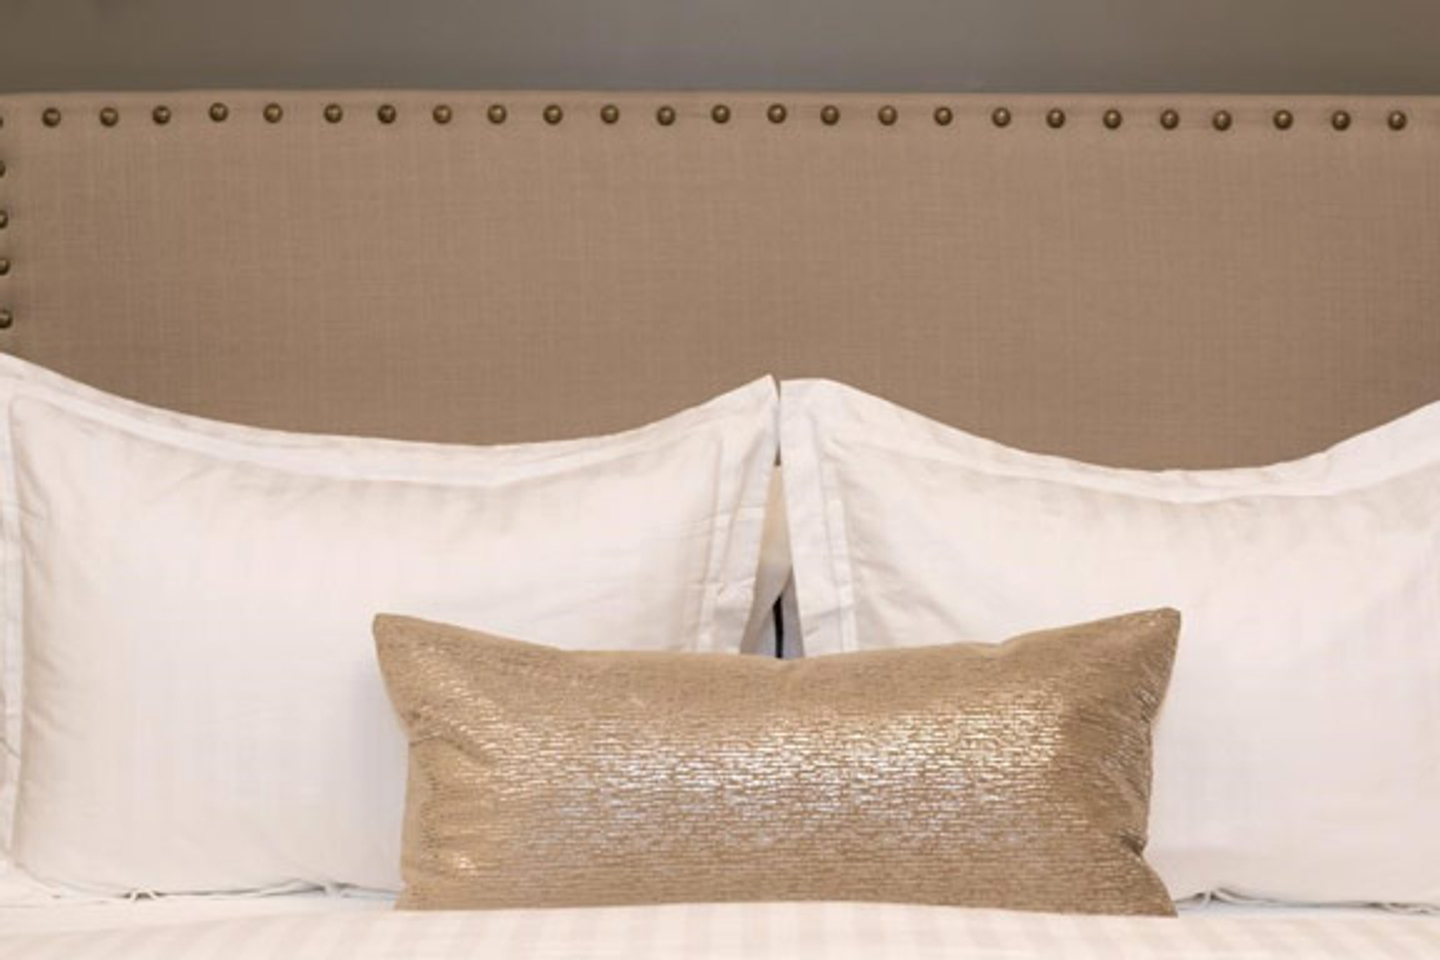 A shimmering beige accent pillow seen from the center of the neatly made bed, rests on two white pillows.